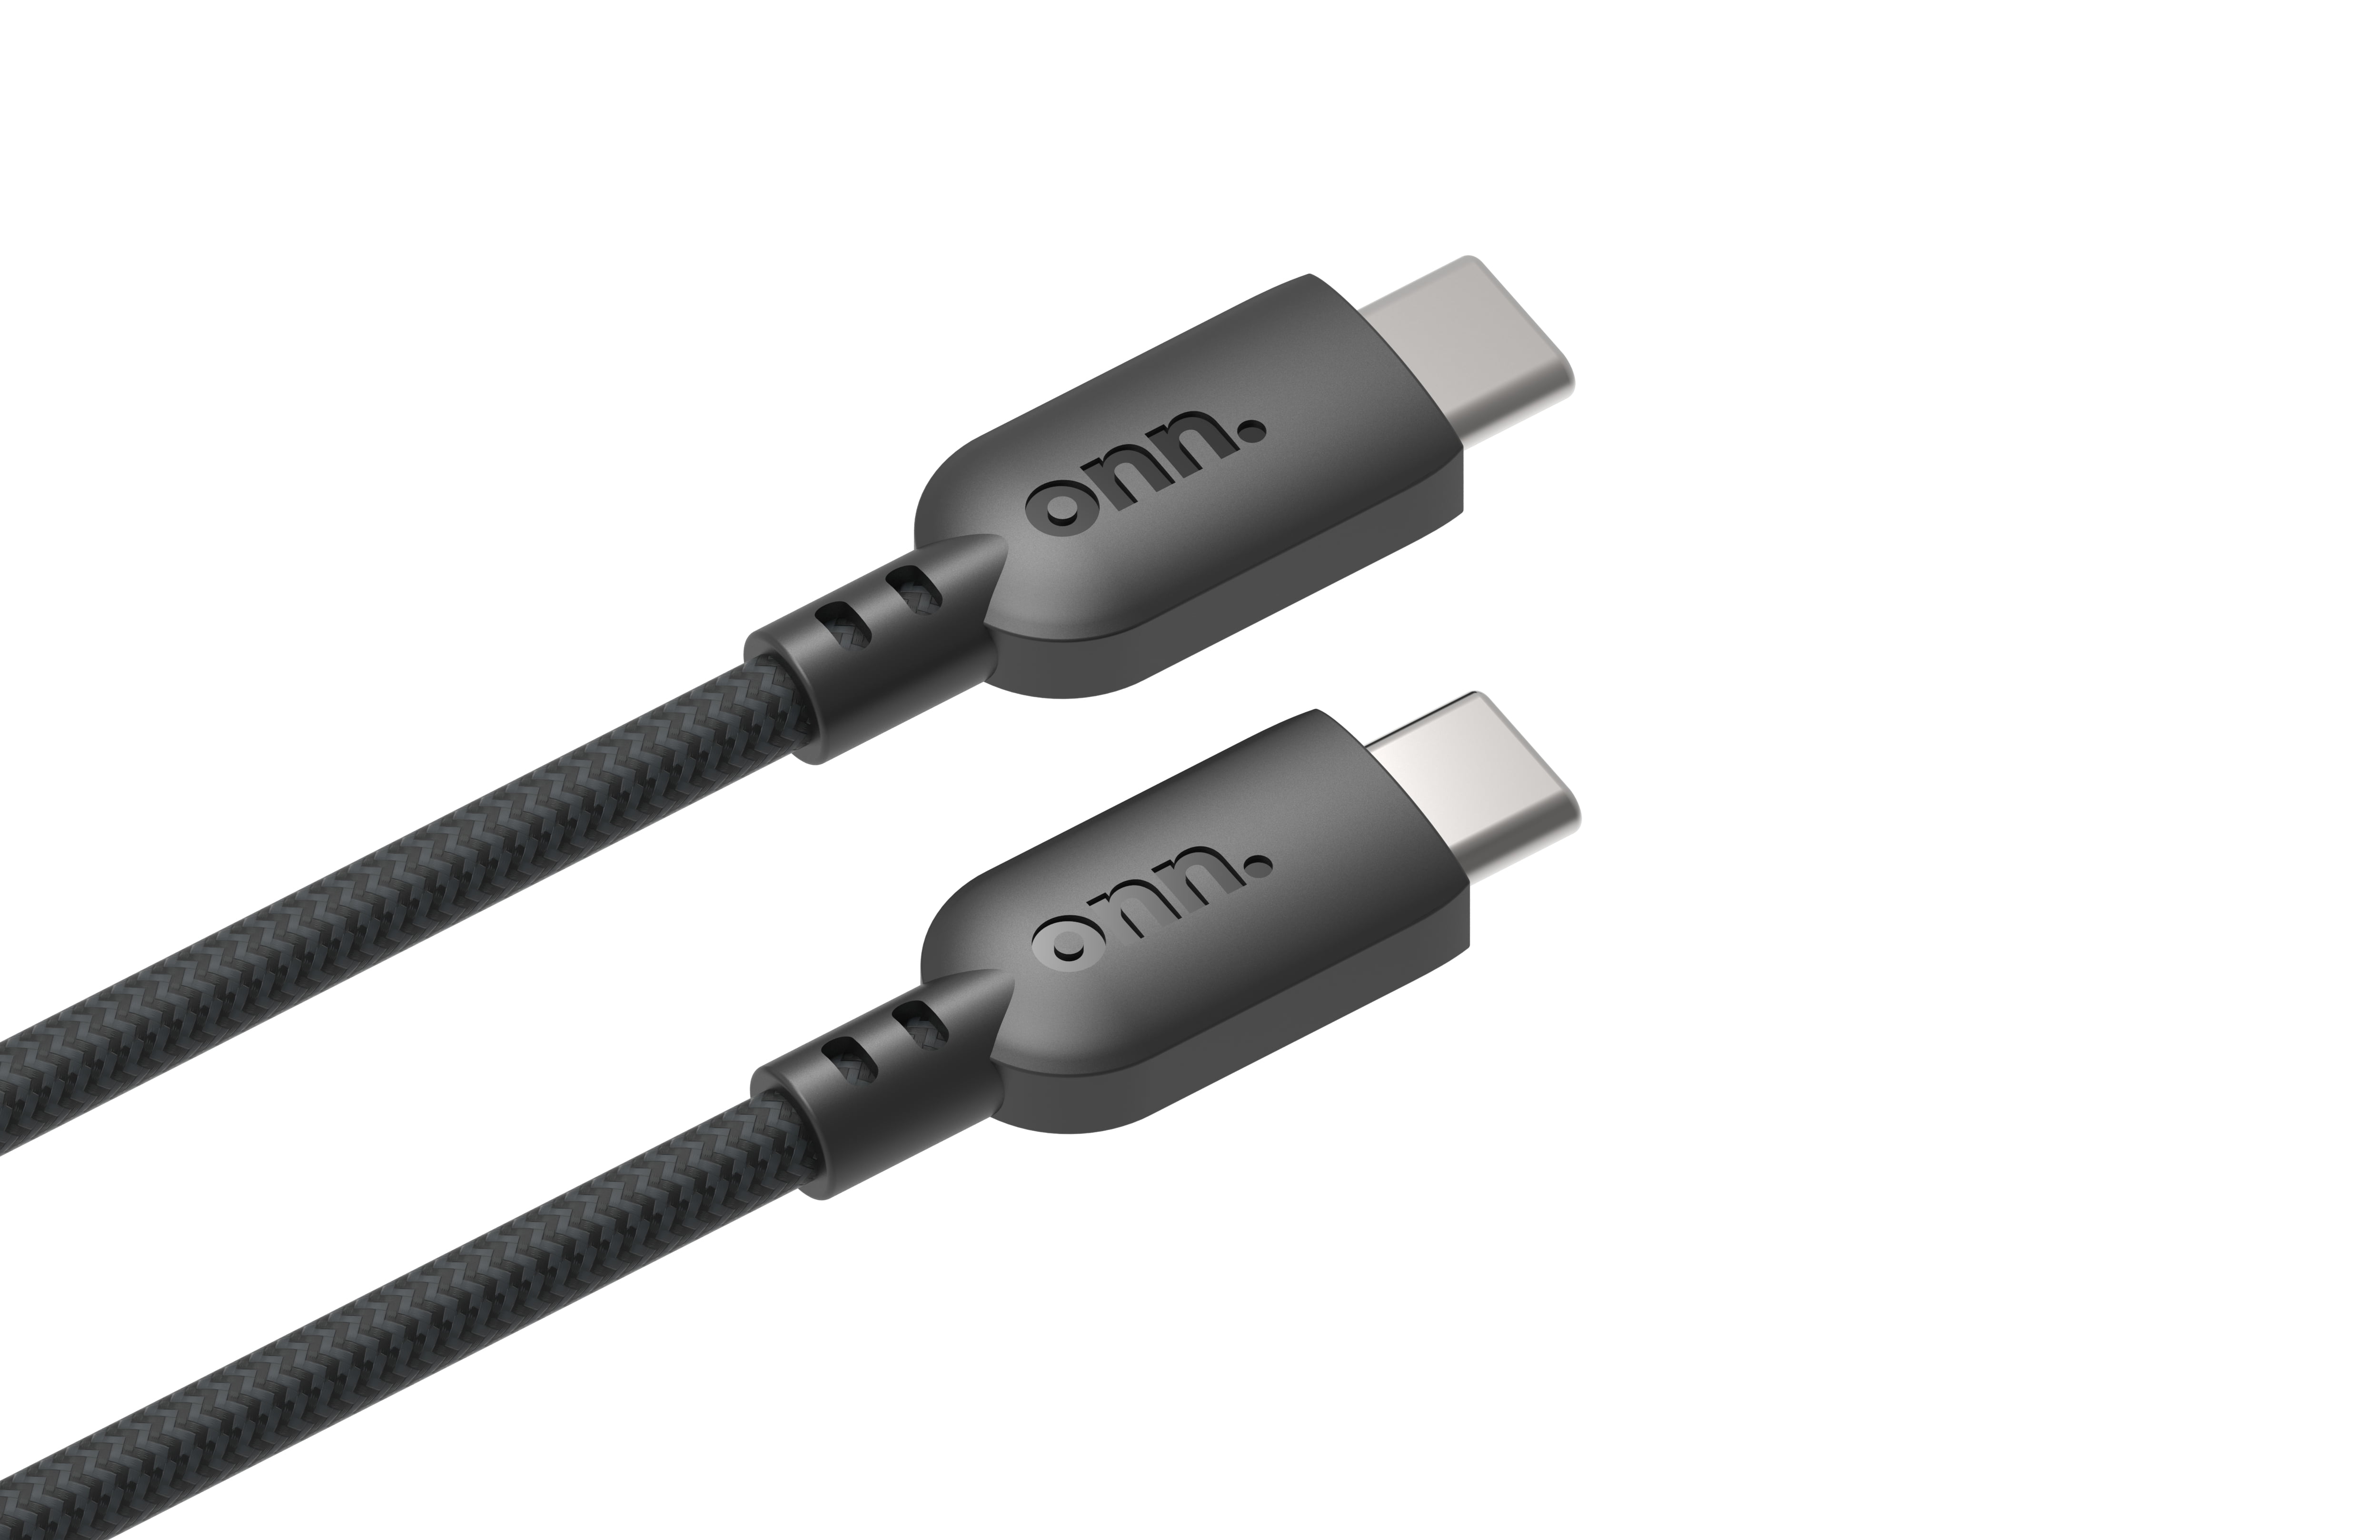 onn. USB C to USB C Cable 240W, USBC Type C Fast Charging Cord